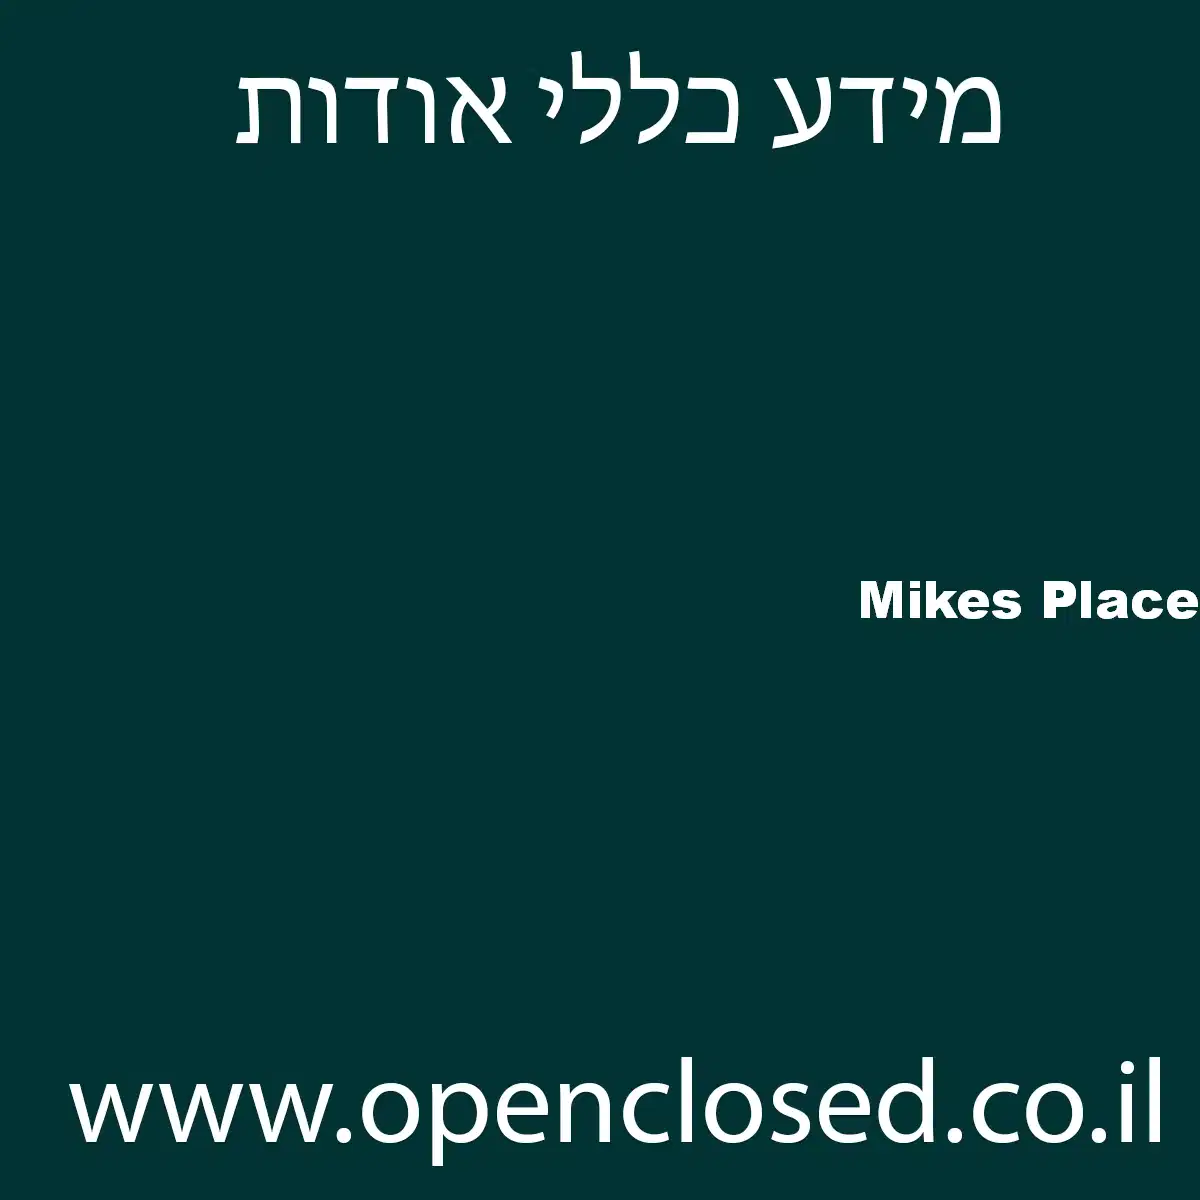 Mikes Place